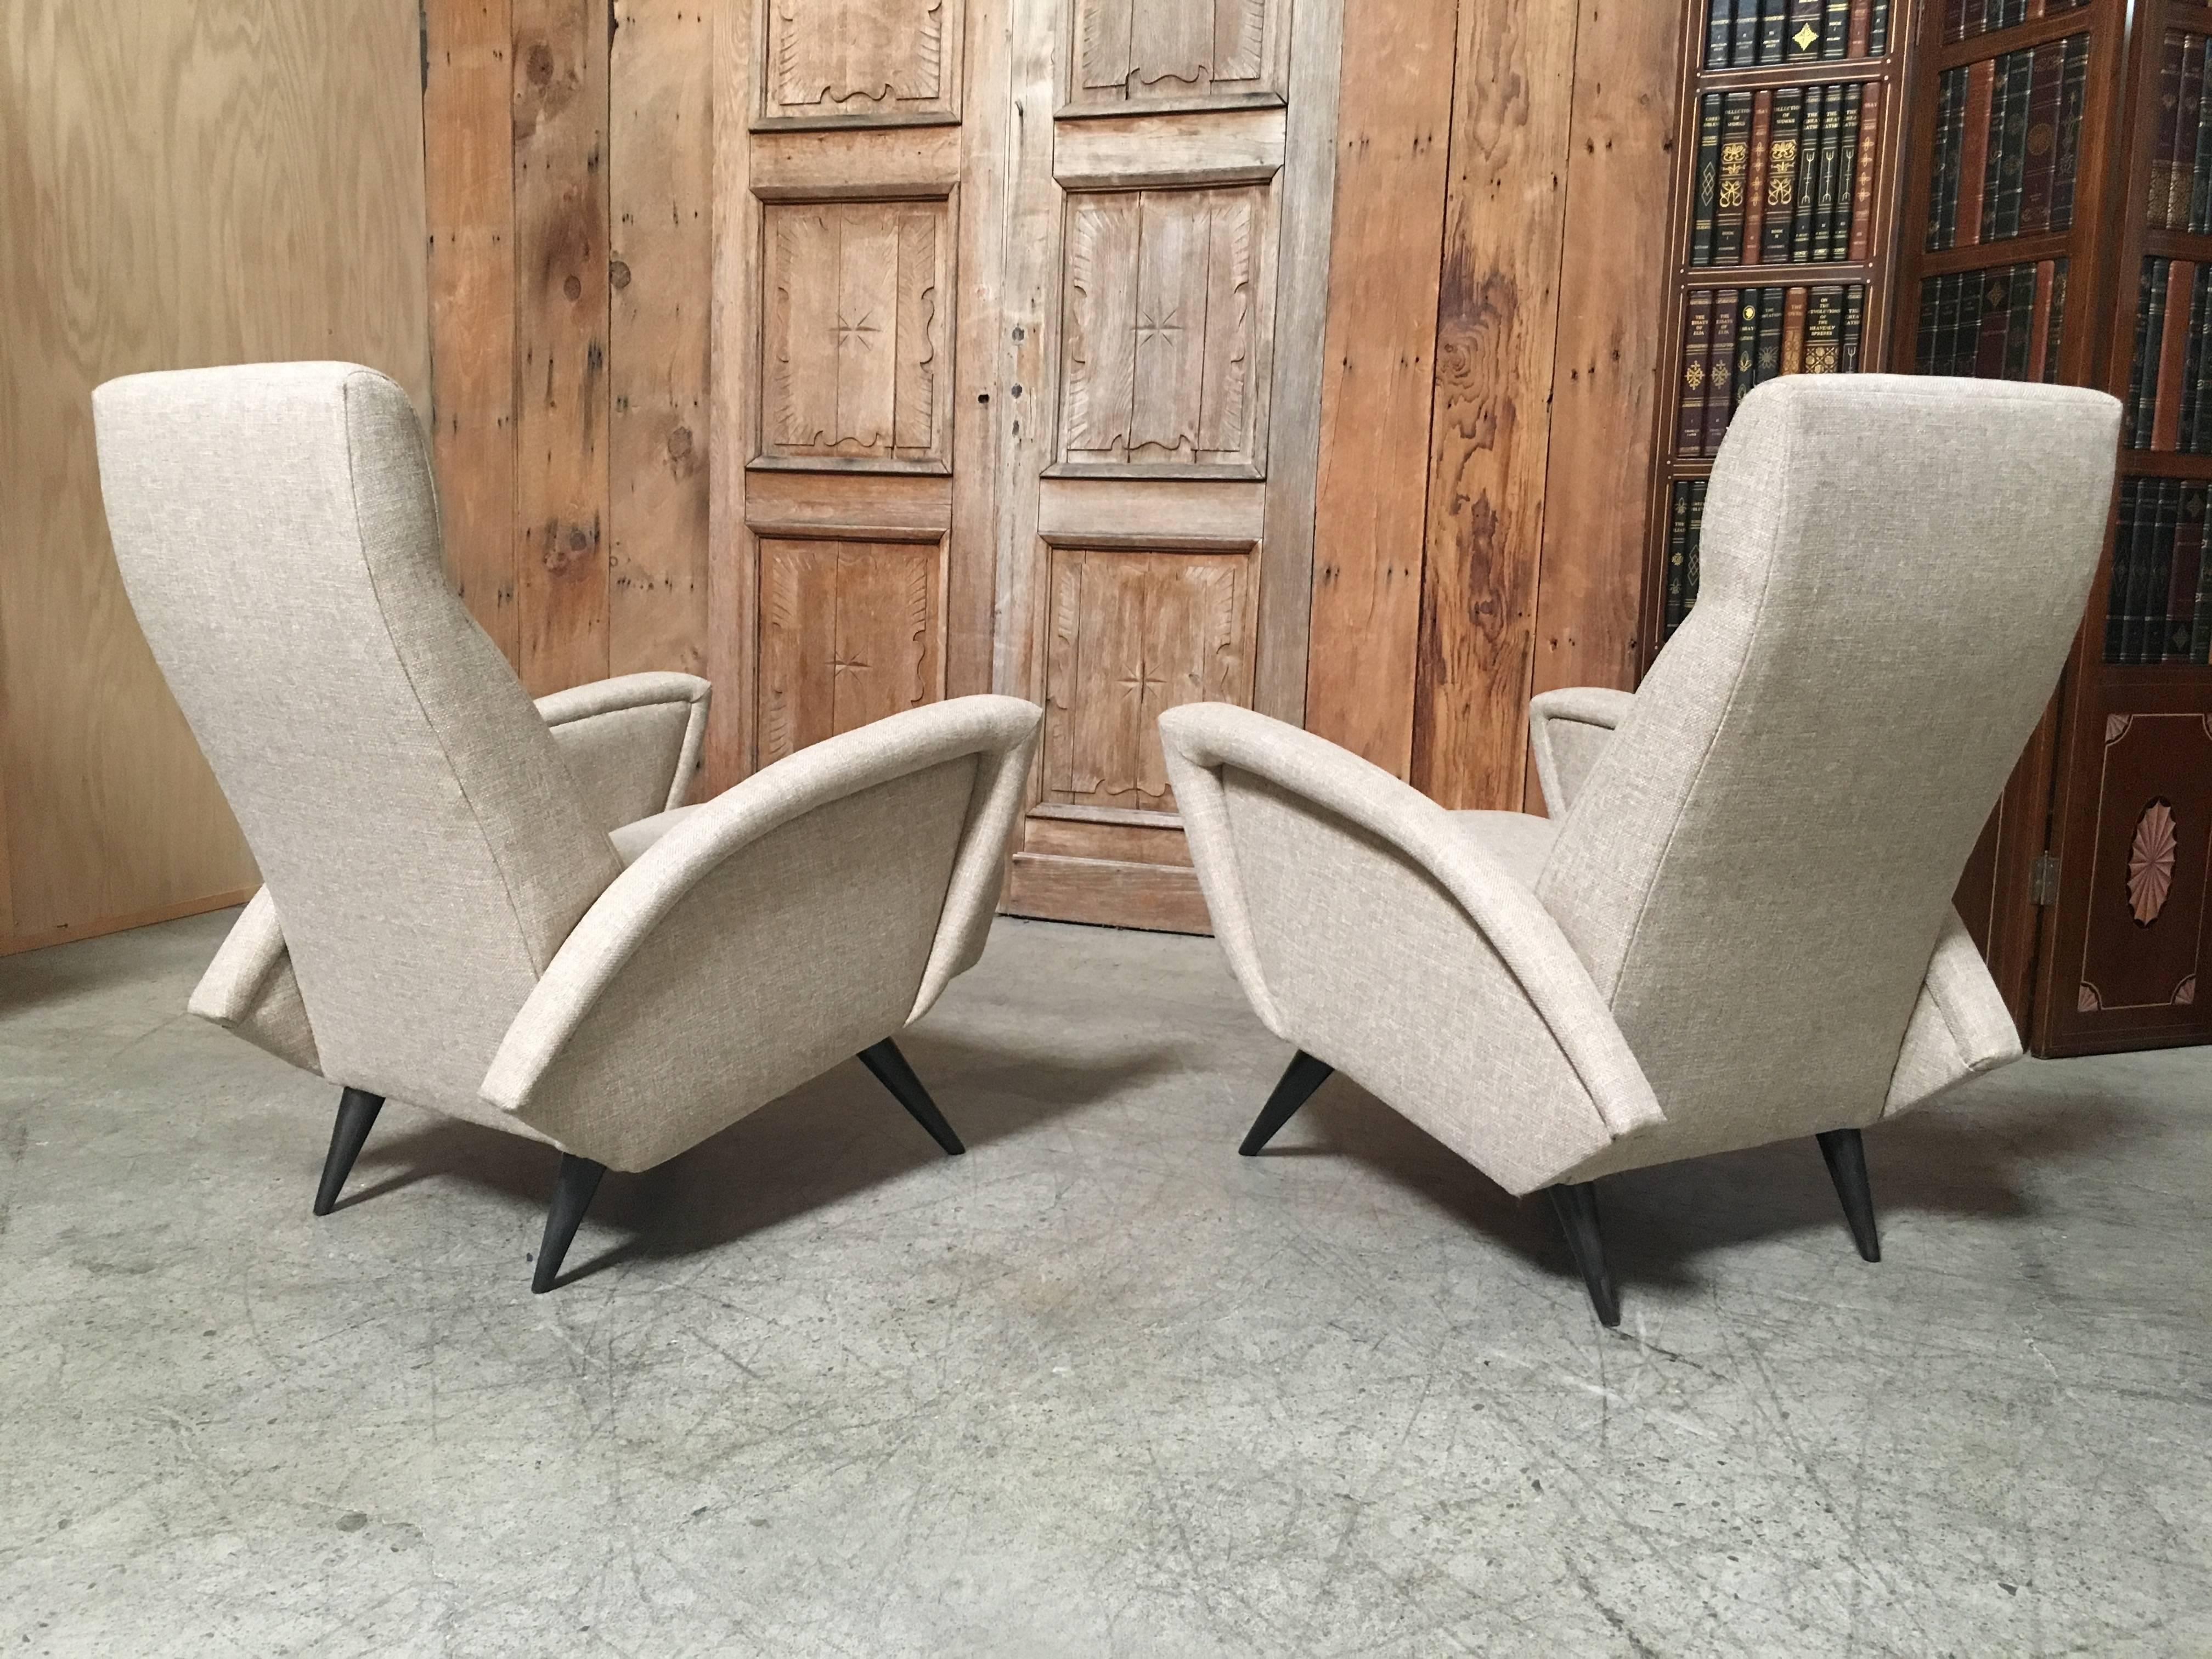 Pair of sculptural Italian lounge chairs.